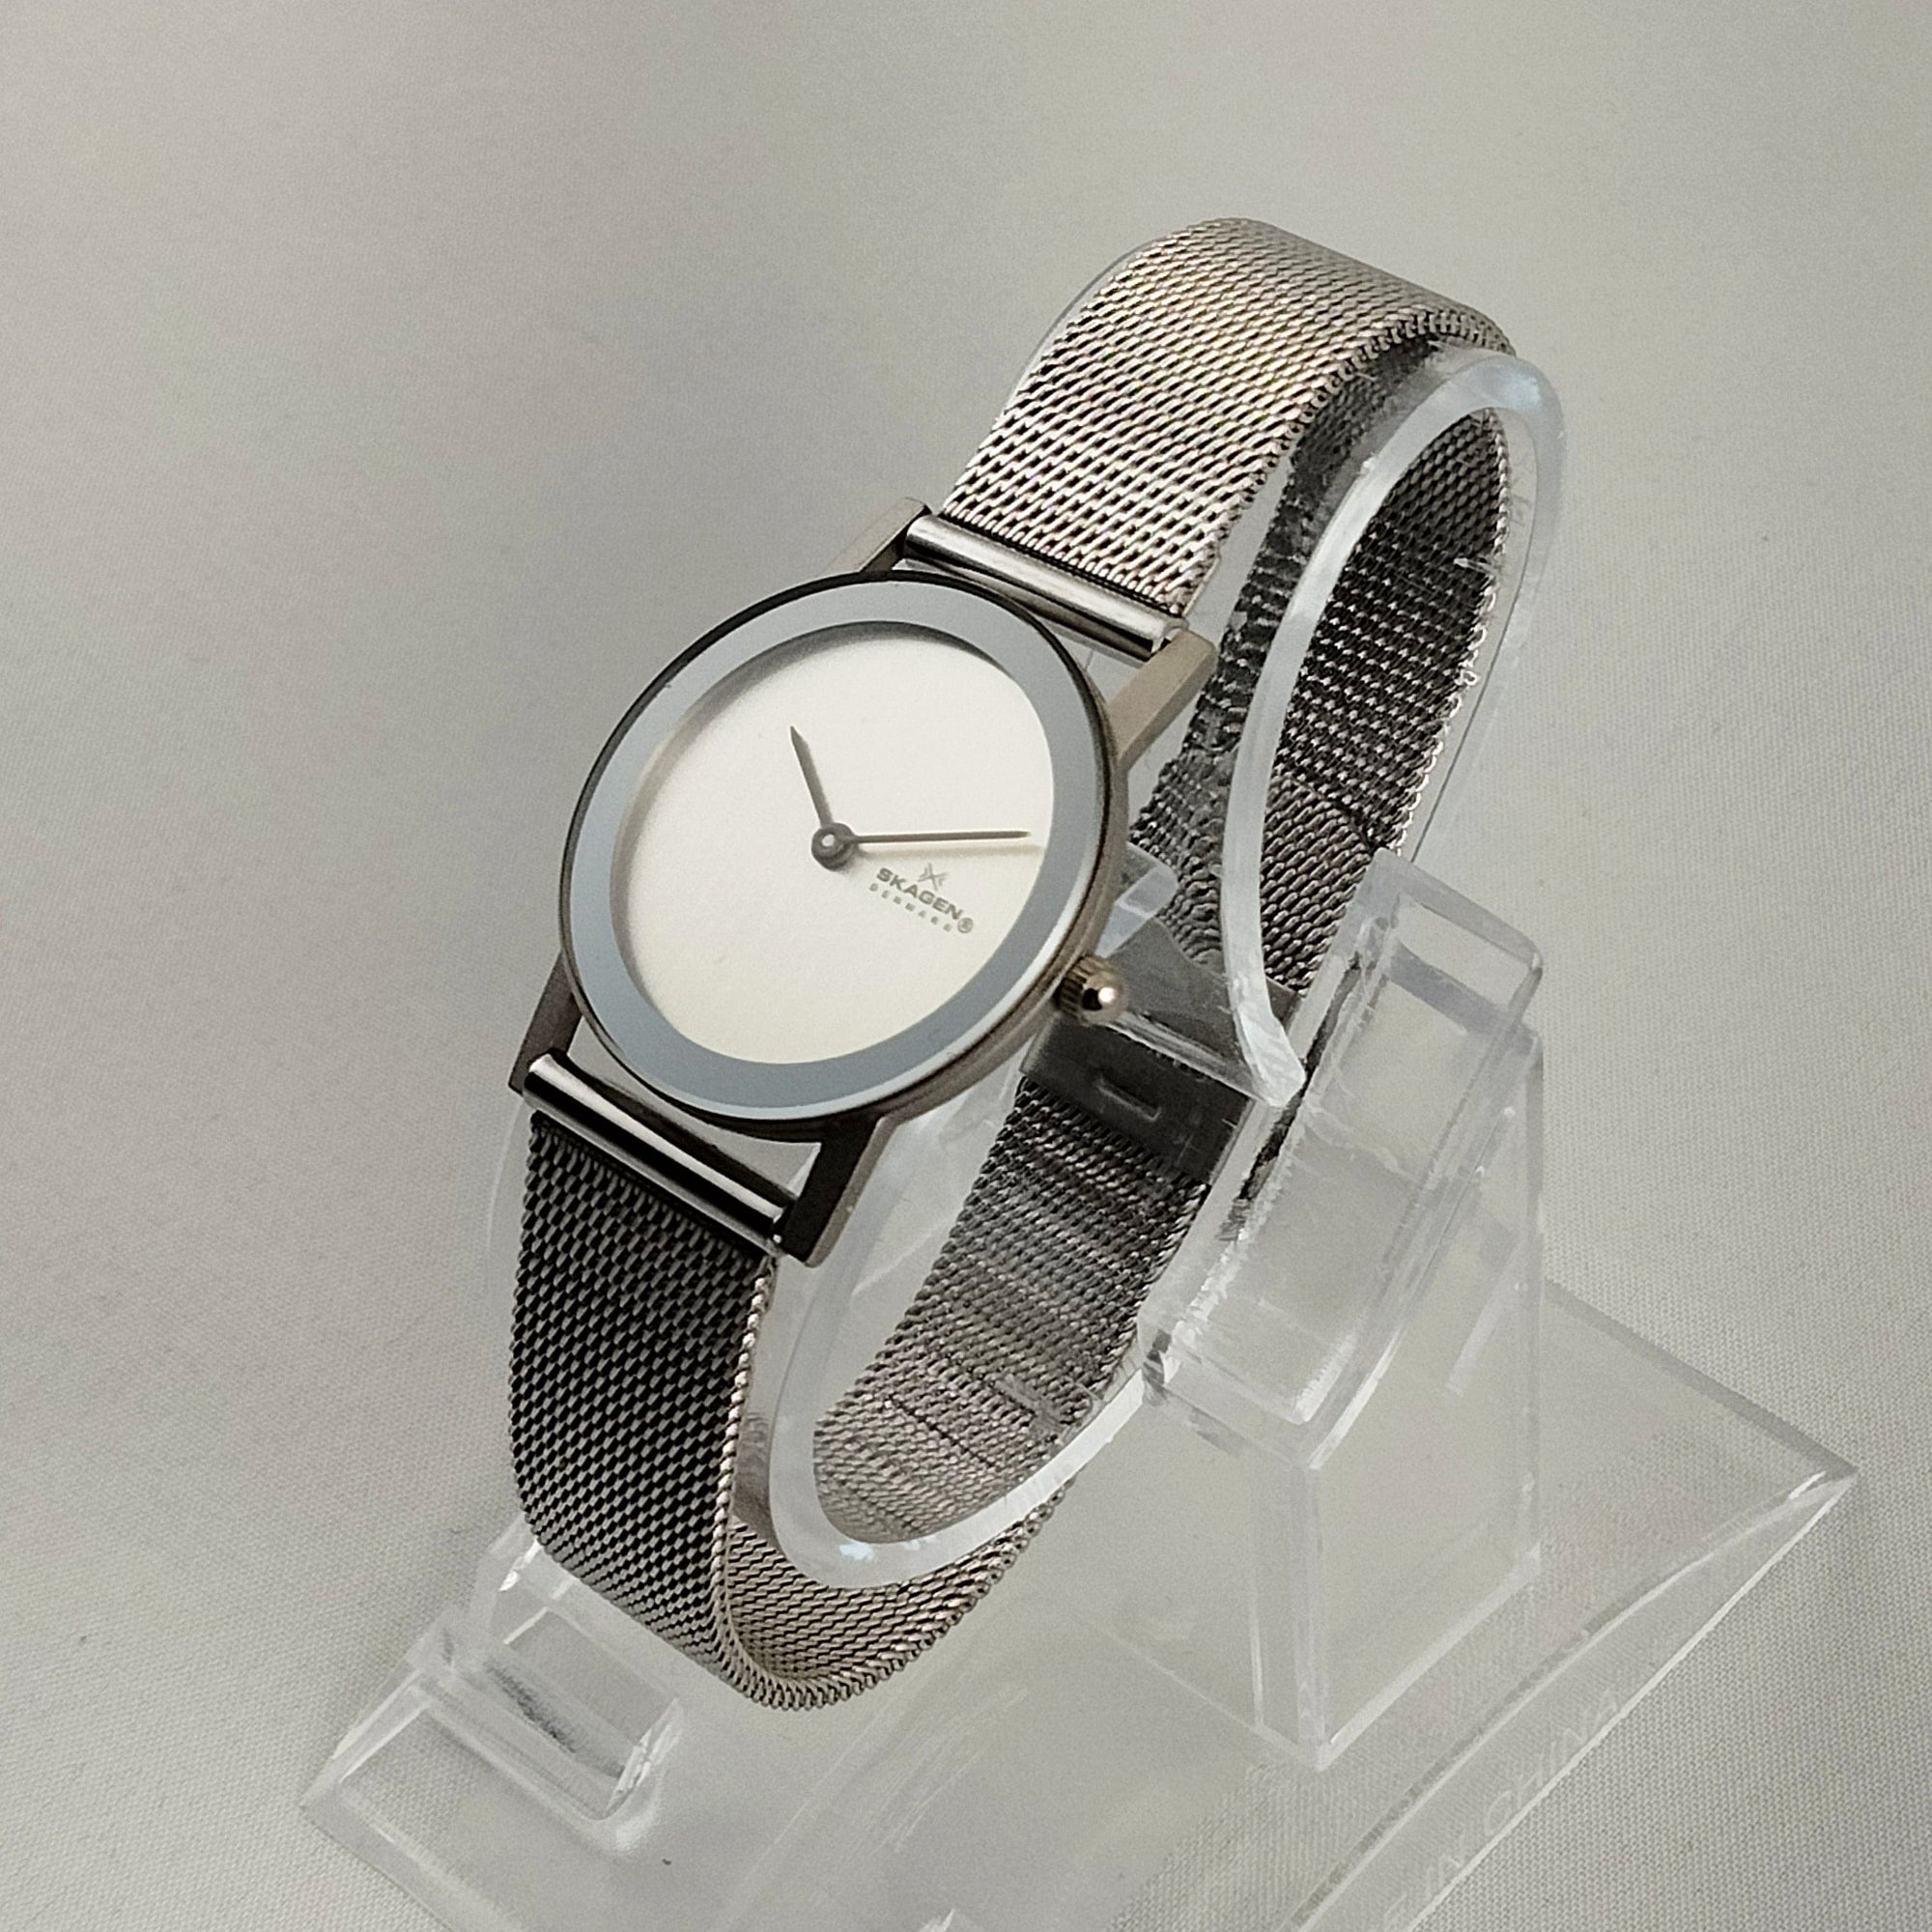 I Like Mikes Mid Century Modern Watches Skagen Unisex Stainless Steel Watch, Clean Face Design, Mesh Strap